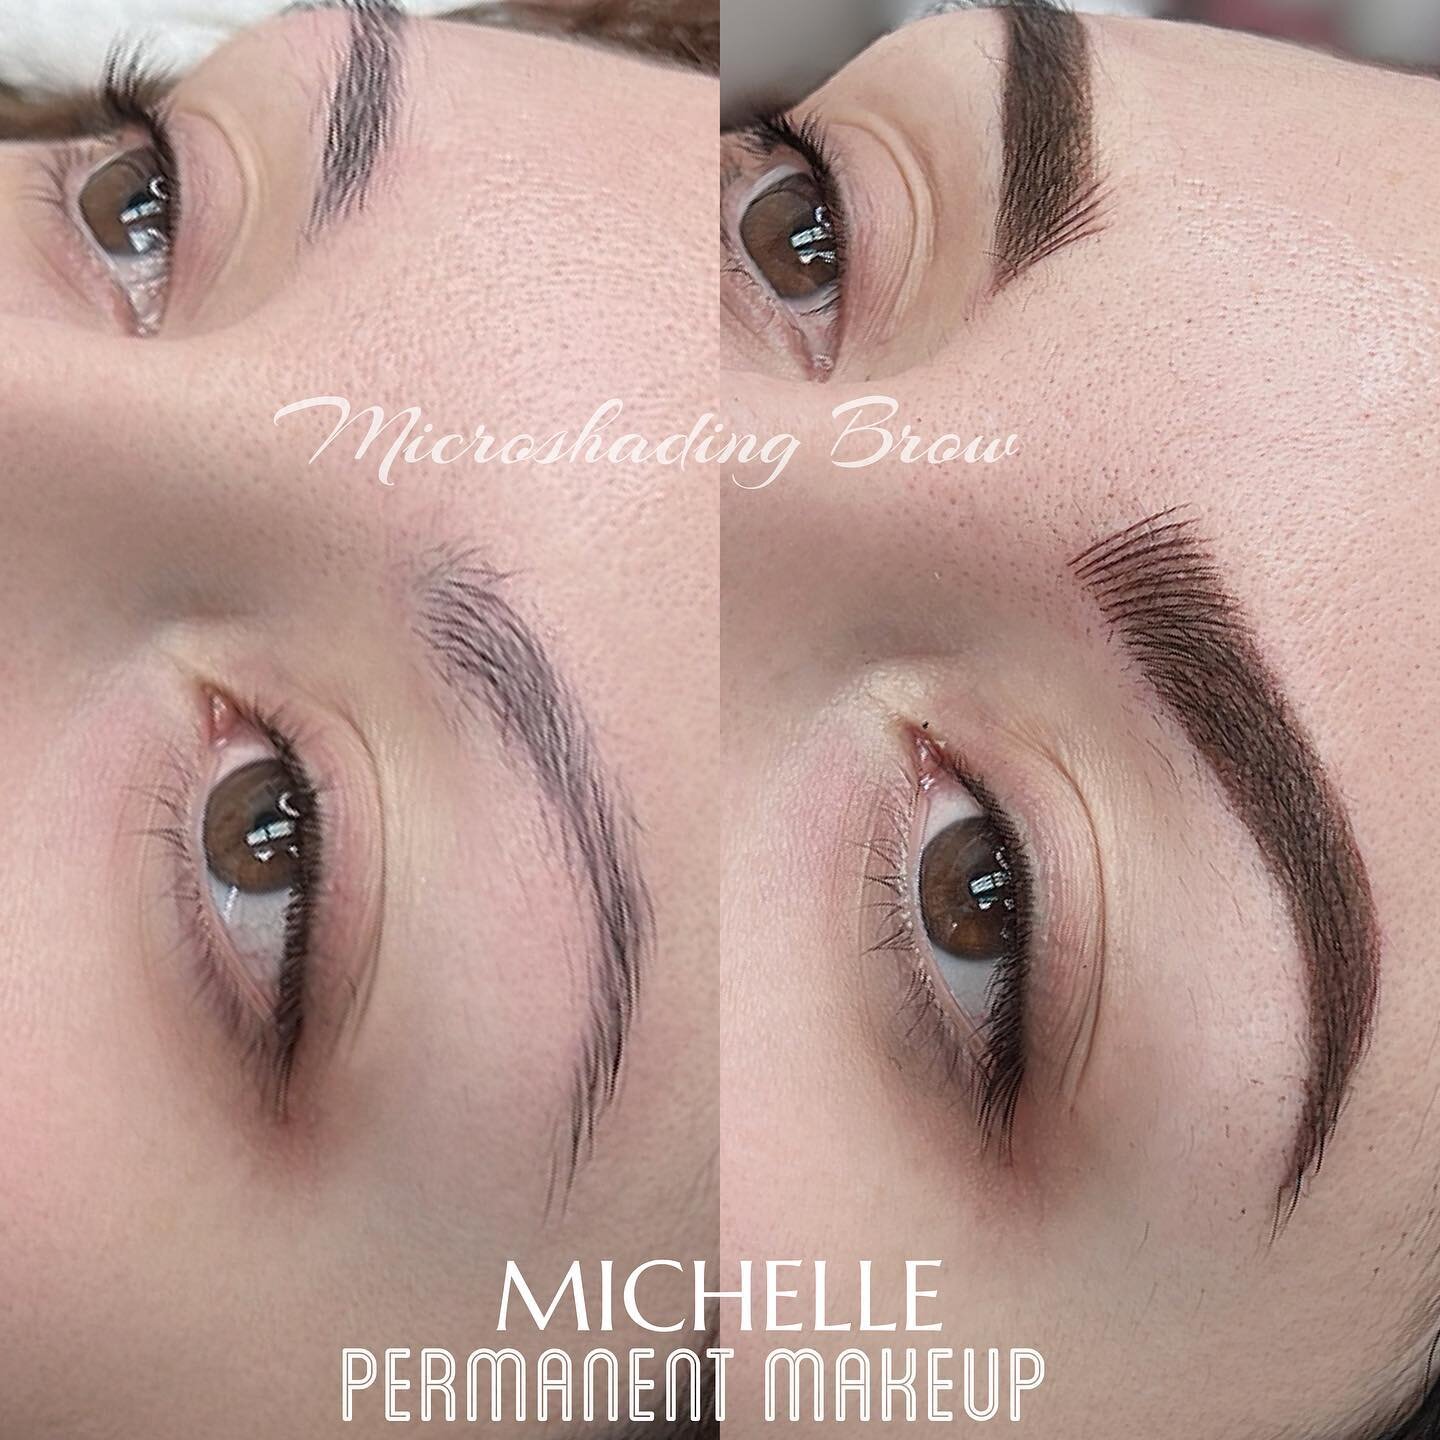 Life isn&rsquo;t perfect , but your brows can be. 

#michellepmu #michellepermanentmakeup #eyebrows #pmu #eyebrow #brows #brow #ombrebrows #microblading #microshading #ombrepowderbrow #eyebrowsonfleek #makeup #browmakeup #beauty #beautiful #instabeau